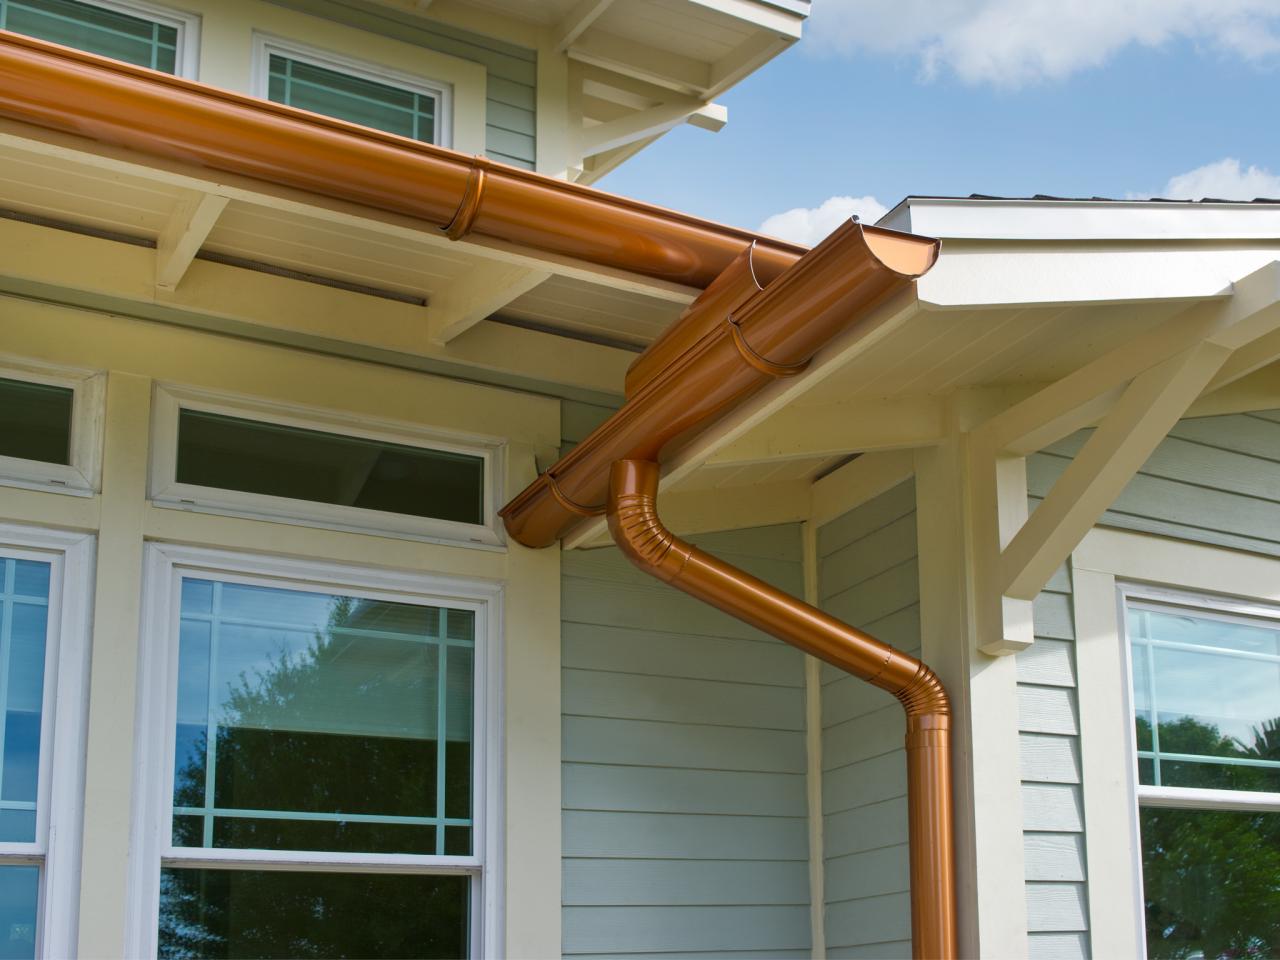 Maximum Value Home Exterior Projects: Gutters | HGTV